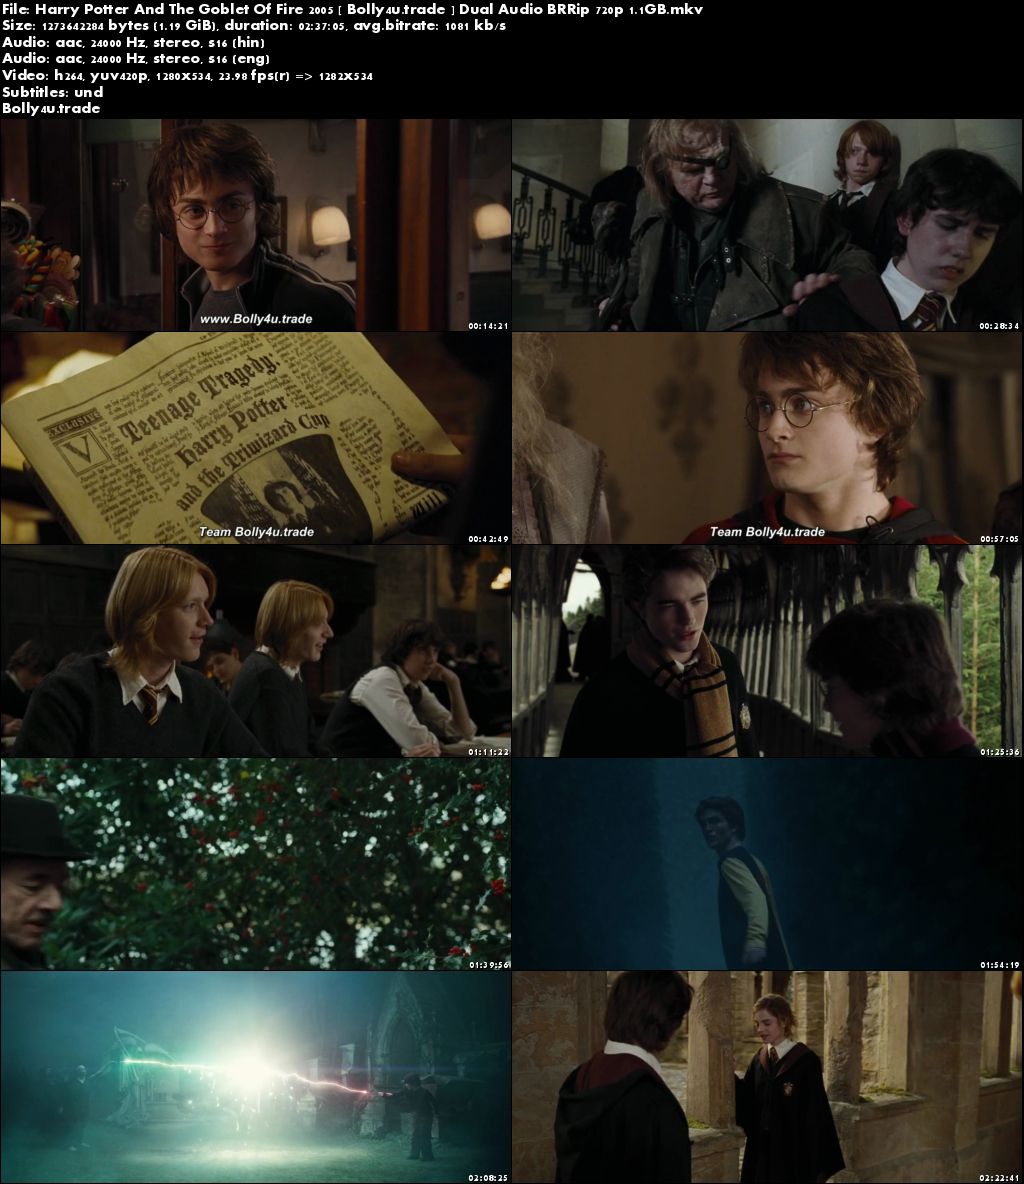 Harry Potter And The Goblet Of Fire 2005 BRRip 1Gb Hindi Dual Audio 720p Download